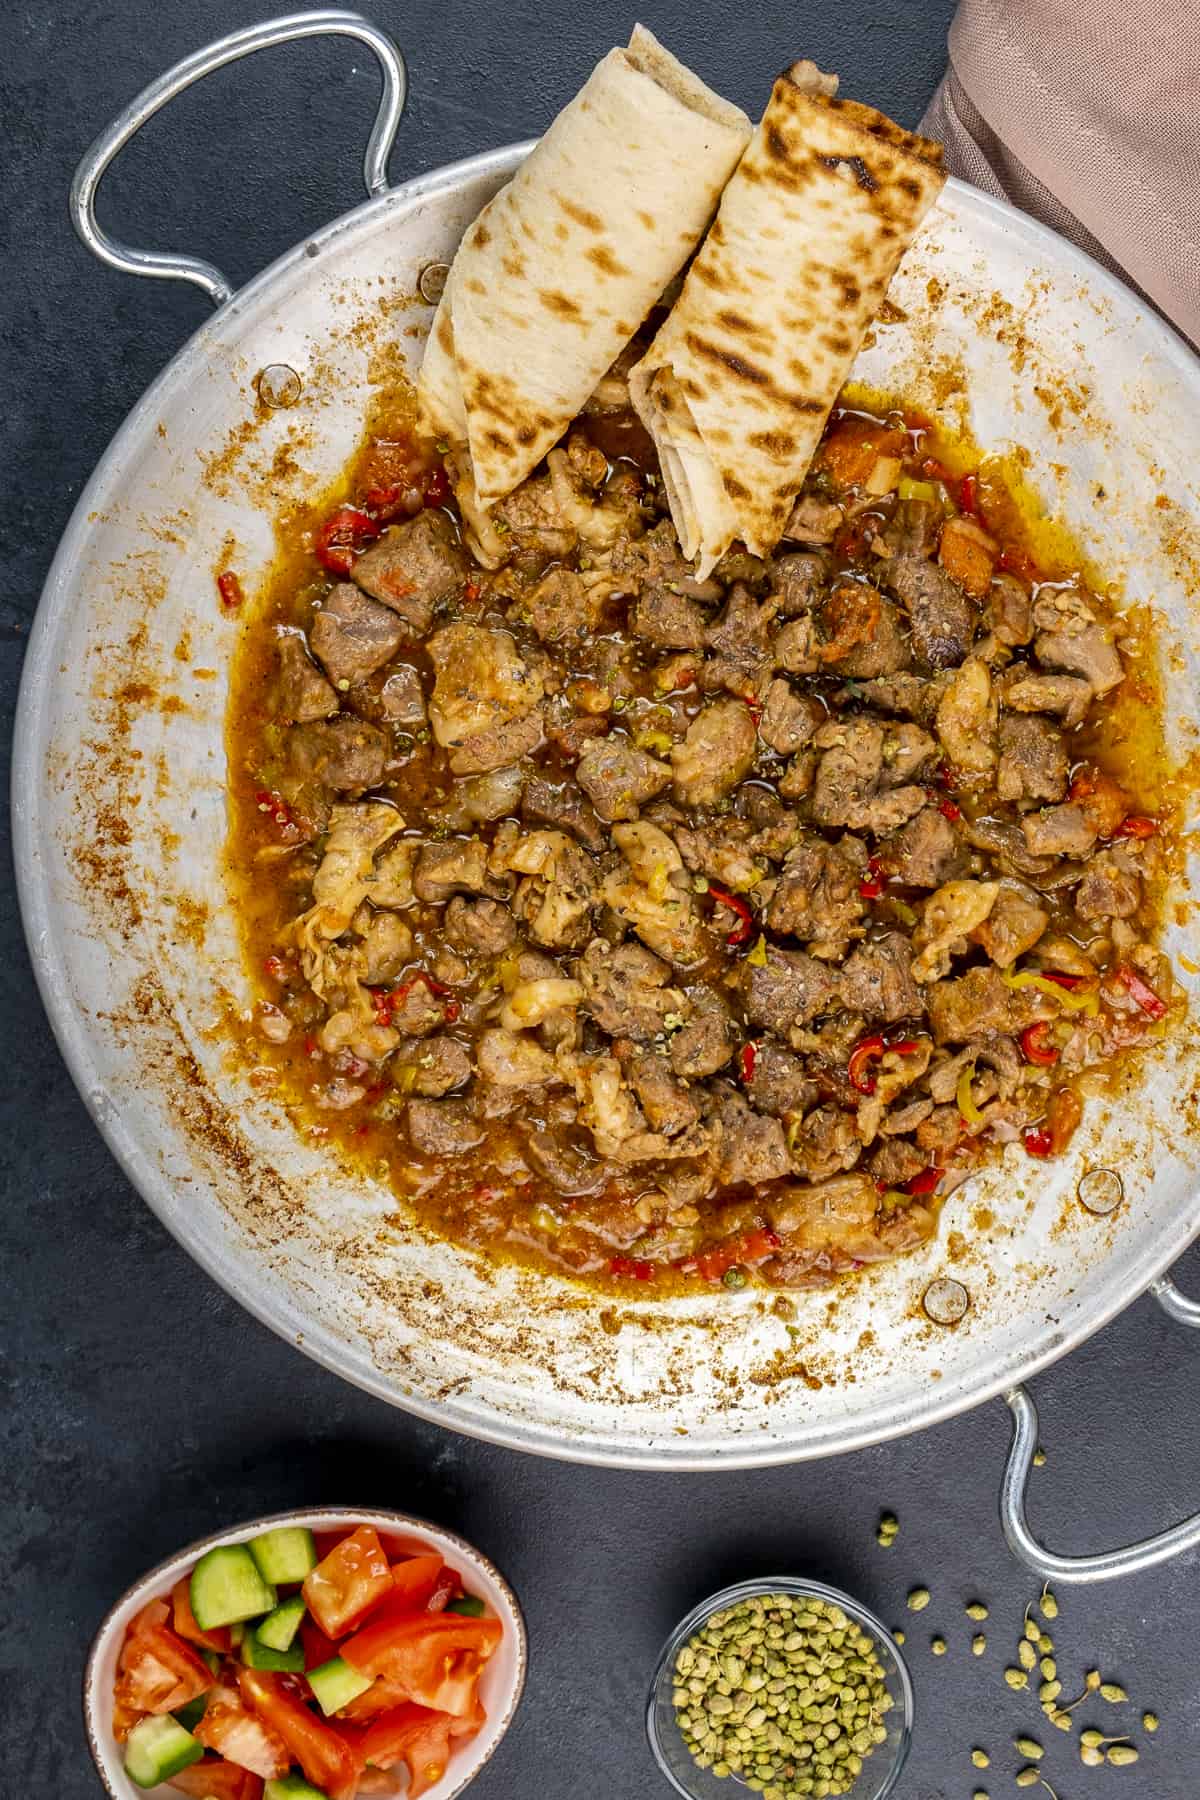 Diced lamb cooked in a pan, rolls of lavash bread are placed on the side.